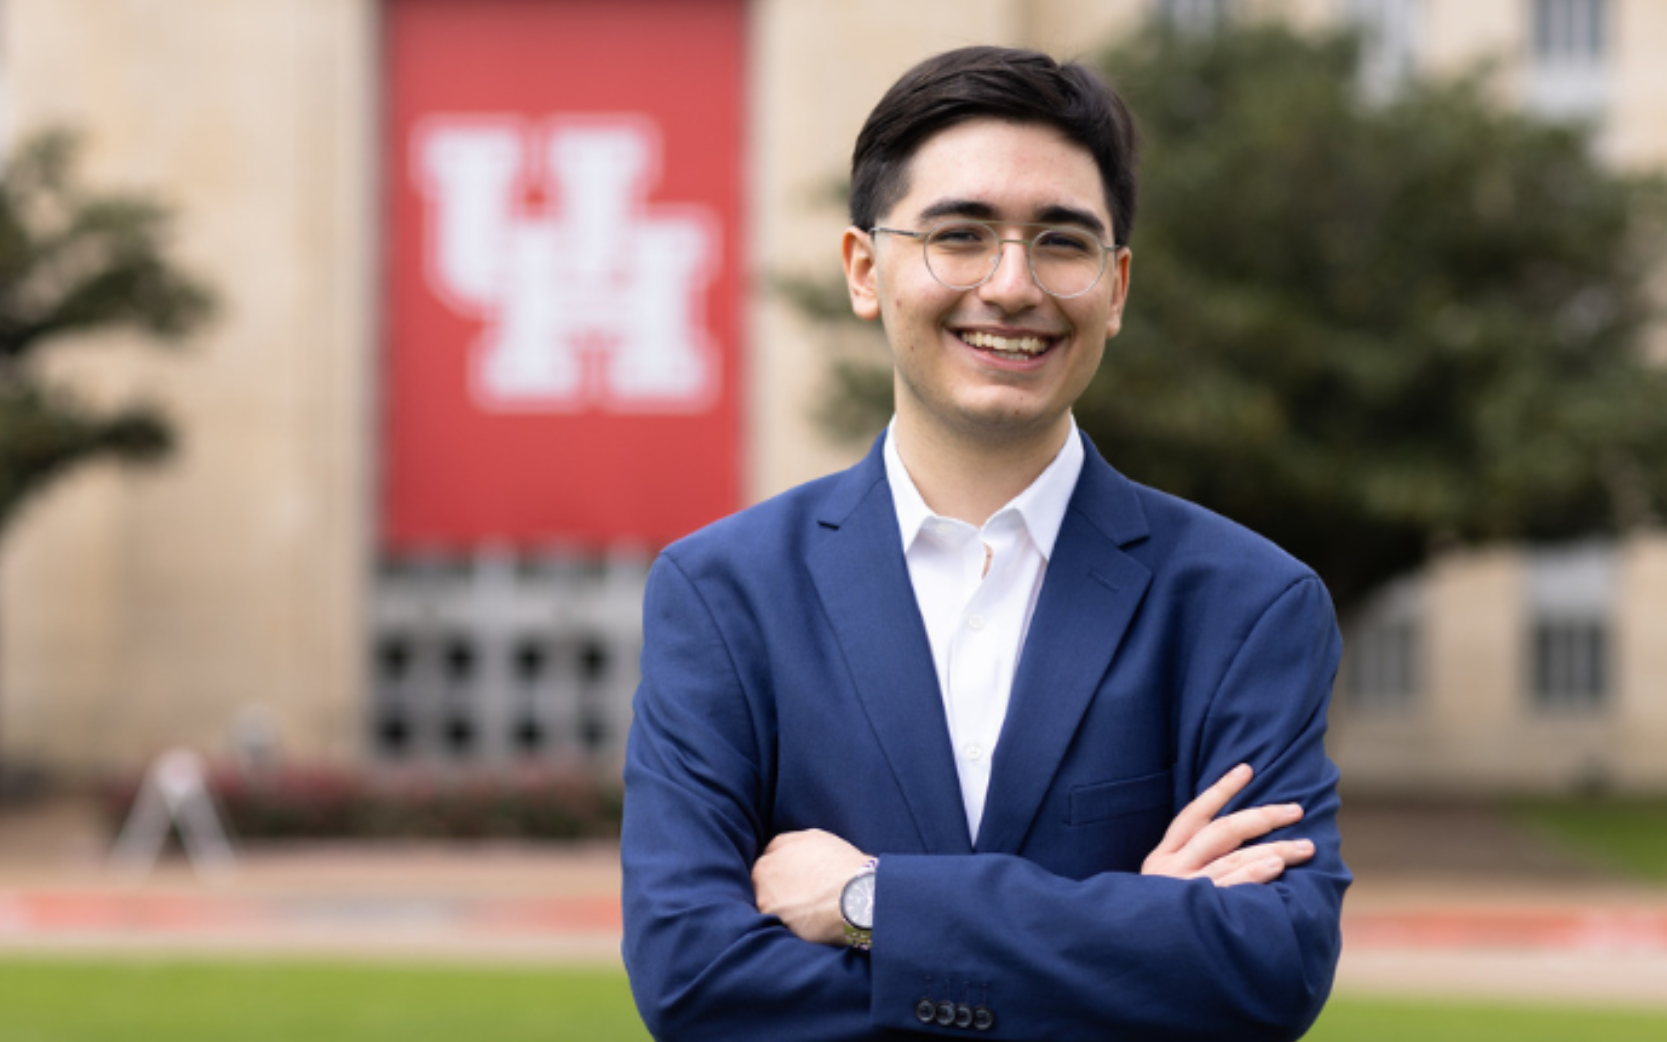 University of Houston Student Mielad Ziaee to Serve as UH System Student Regent